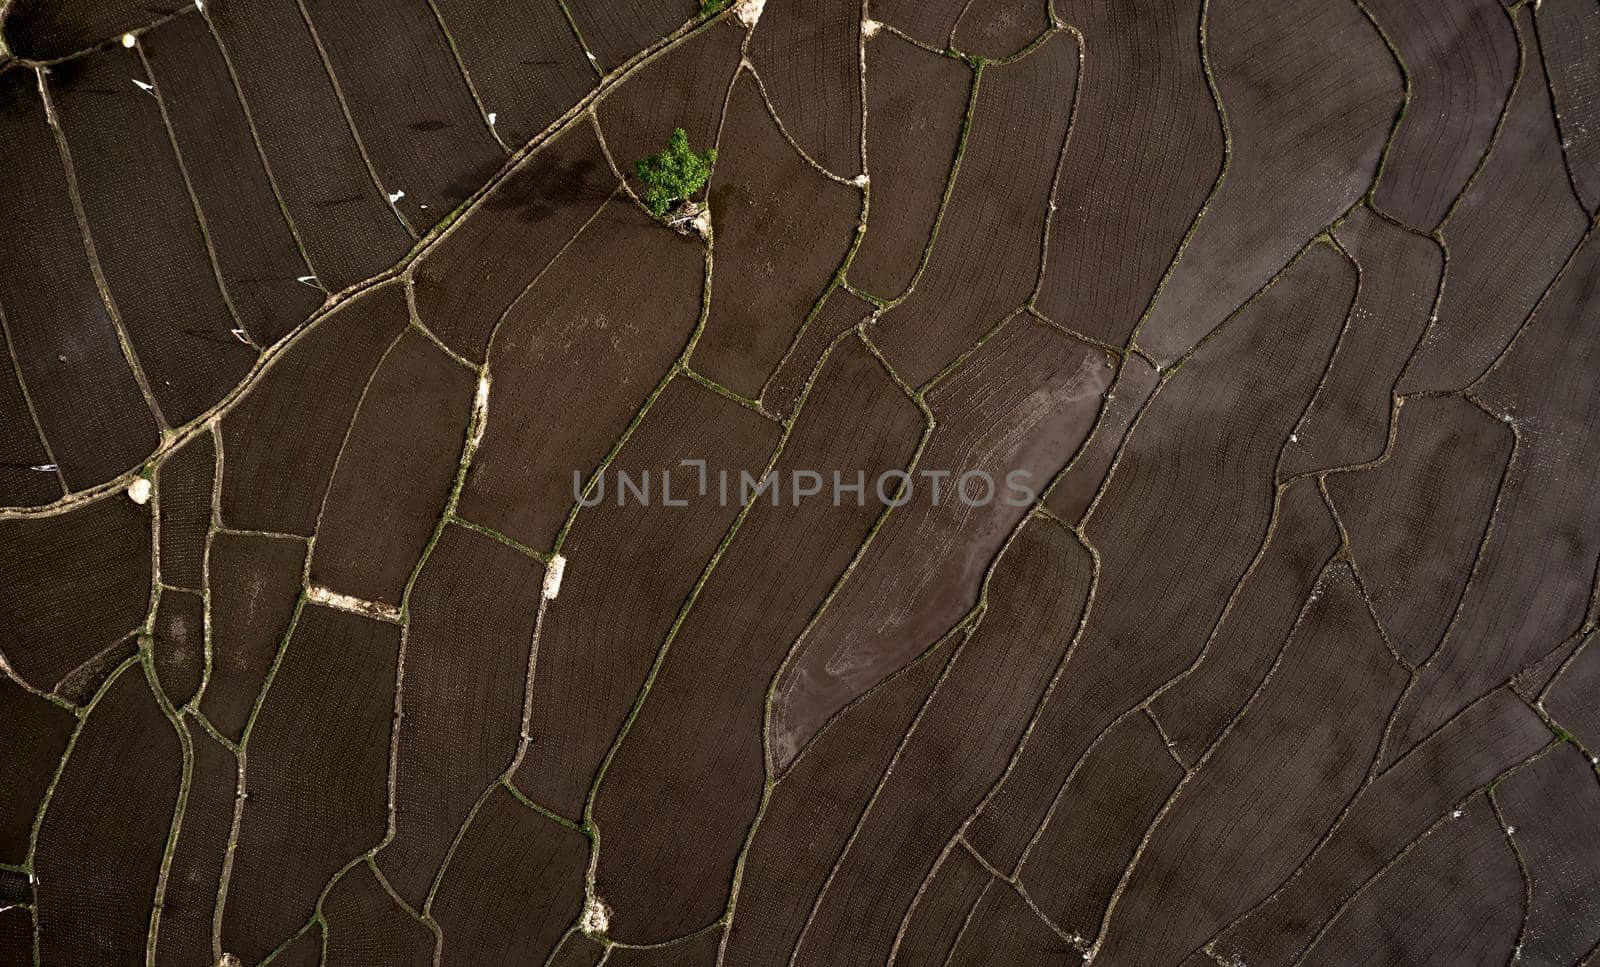 Aerial view of Planted Rice fields. geometry of agriculture. Bali, Indonesia